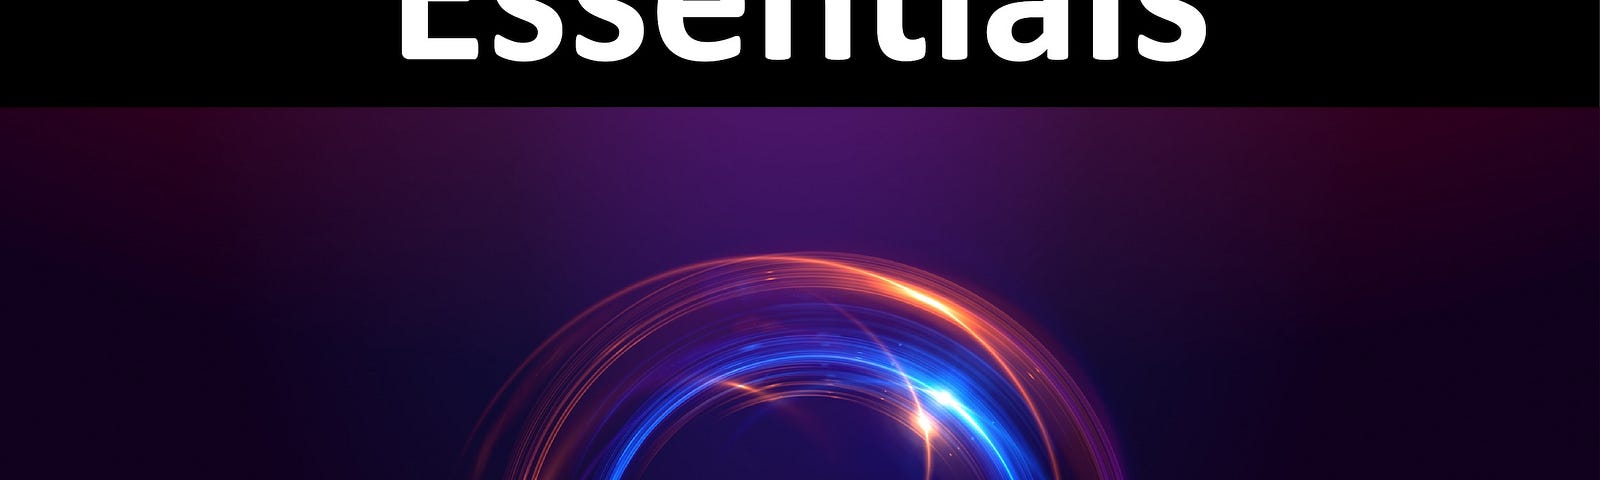 Book cover featuring a dark background with rings of blue and purple light